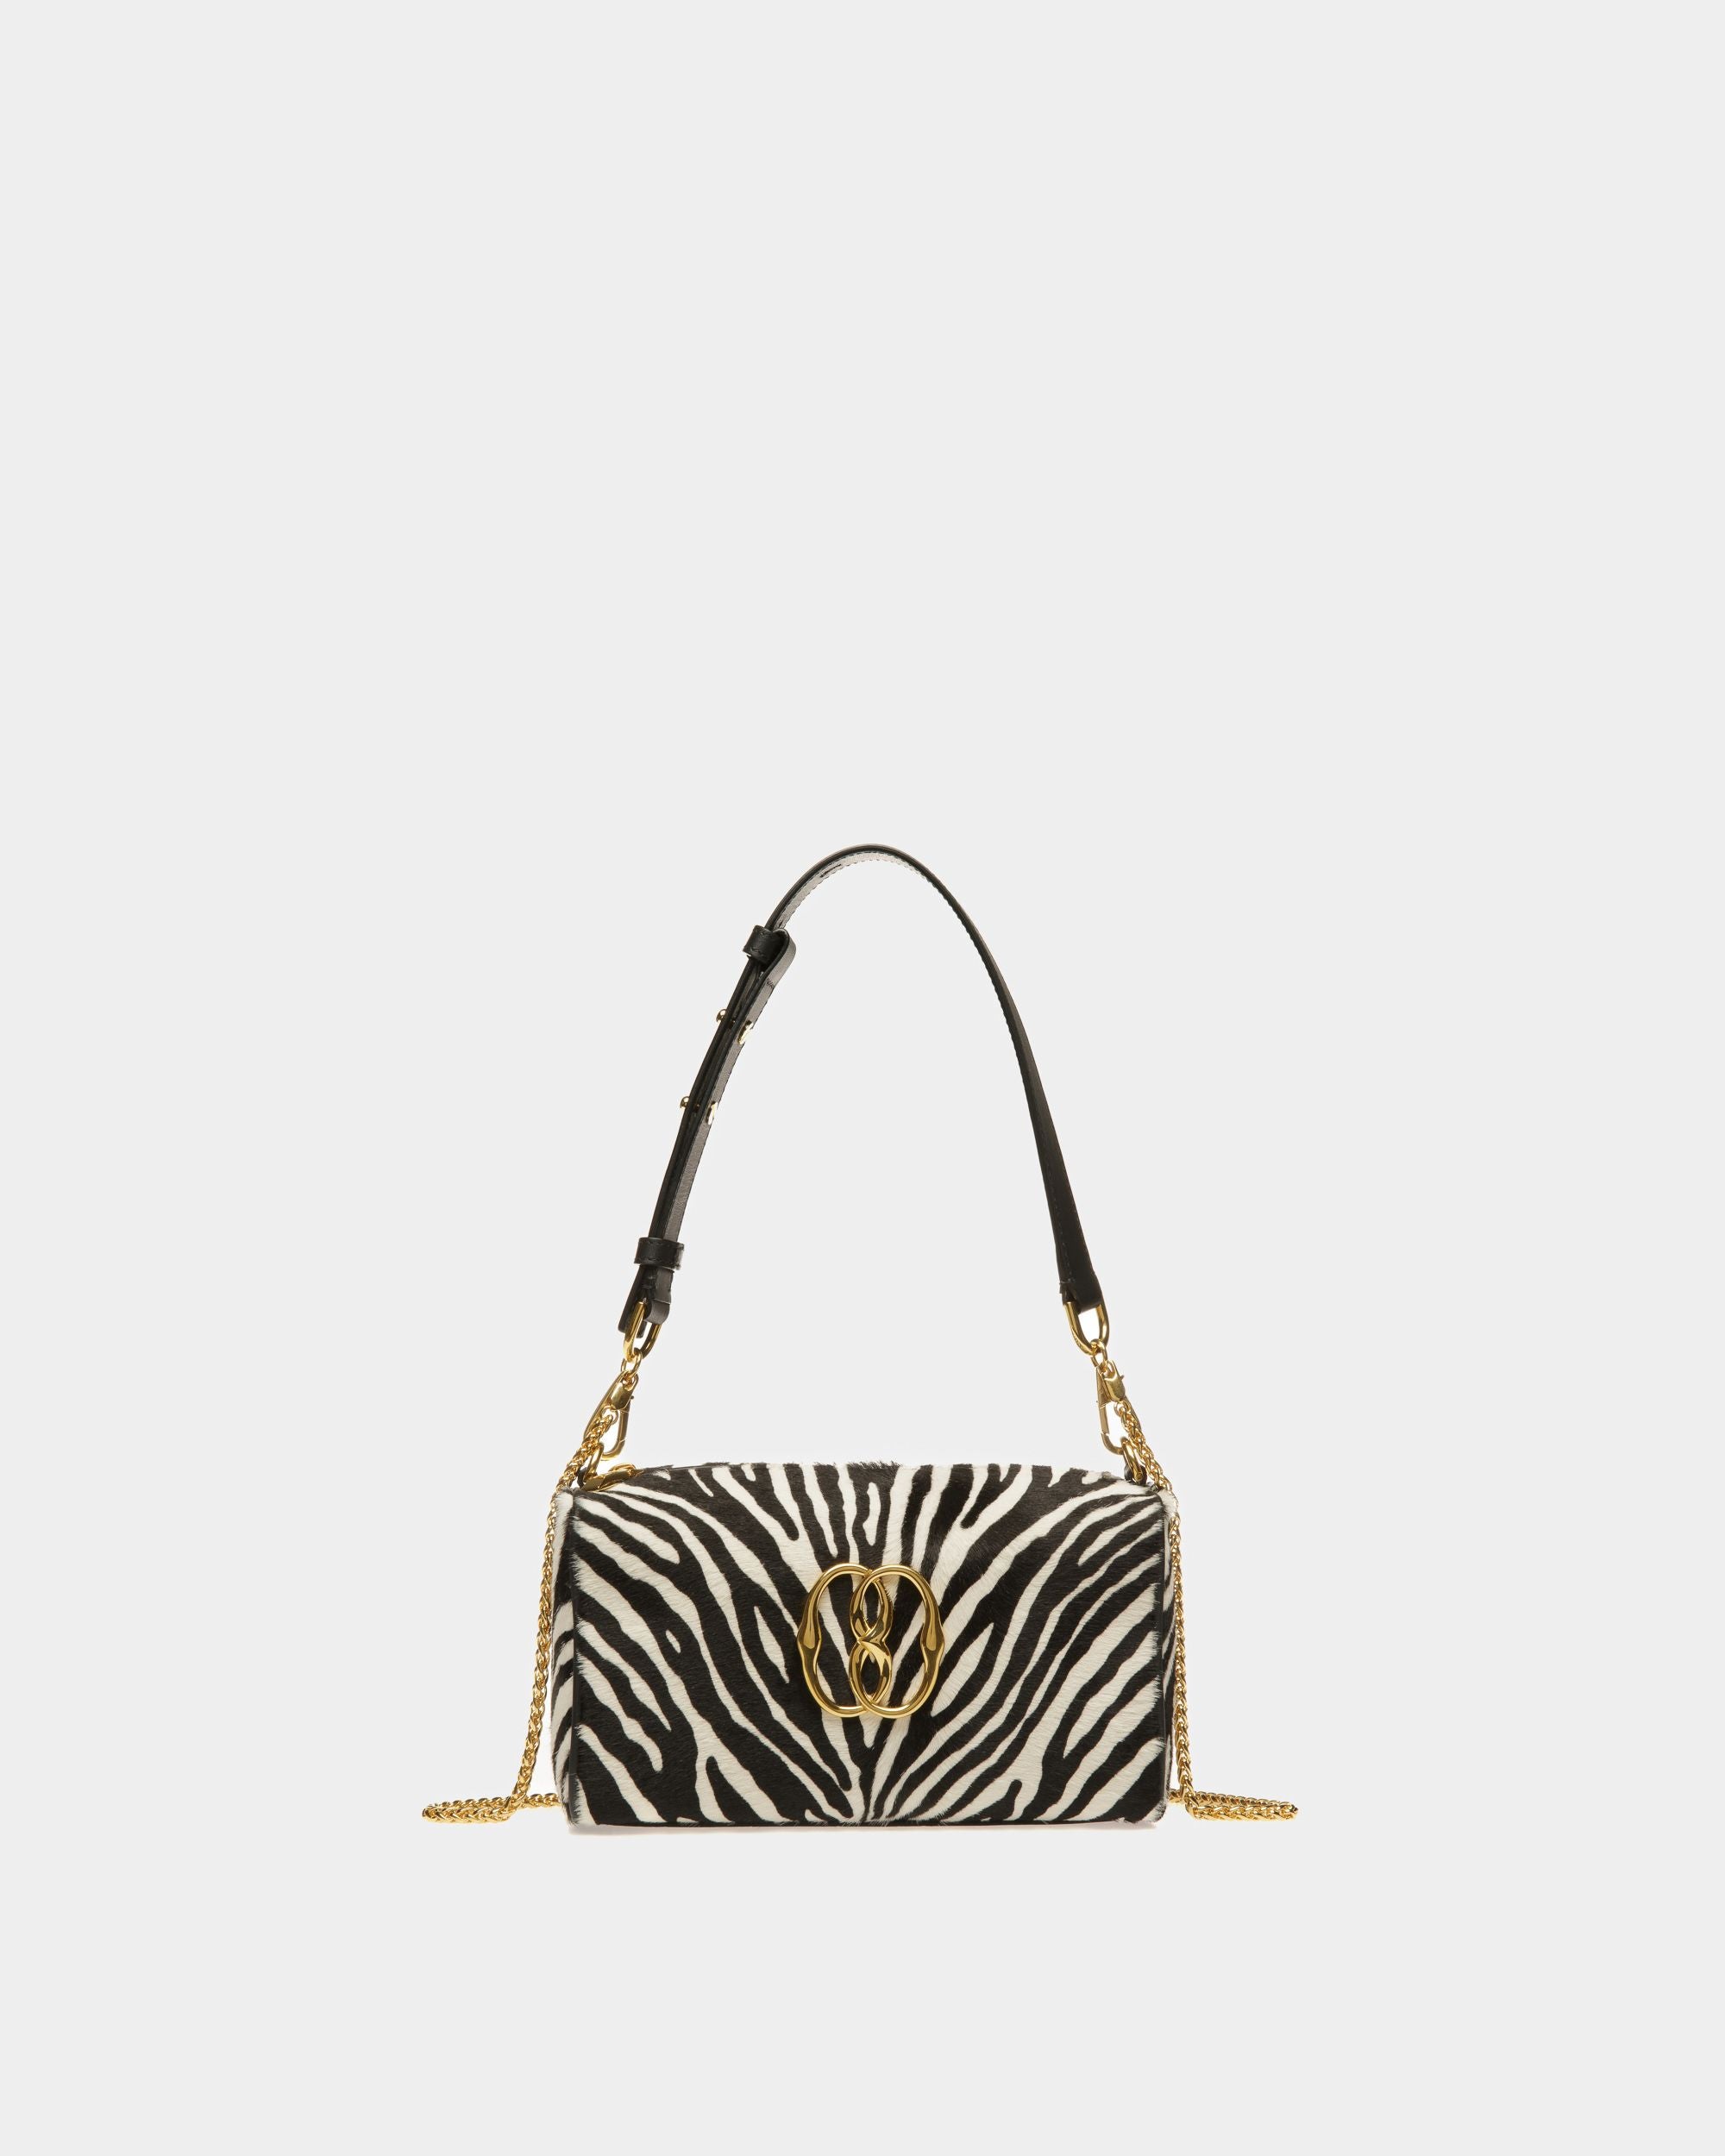 Emblem Rox Minibag | Women's Minibag | White And Black Haircalf Leather | Bally | Still Life Front